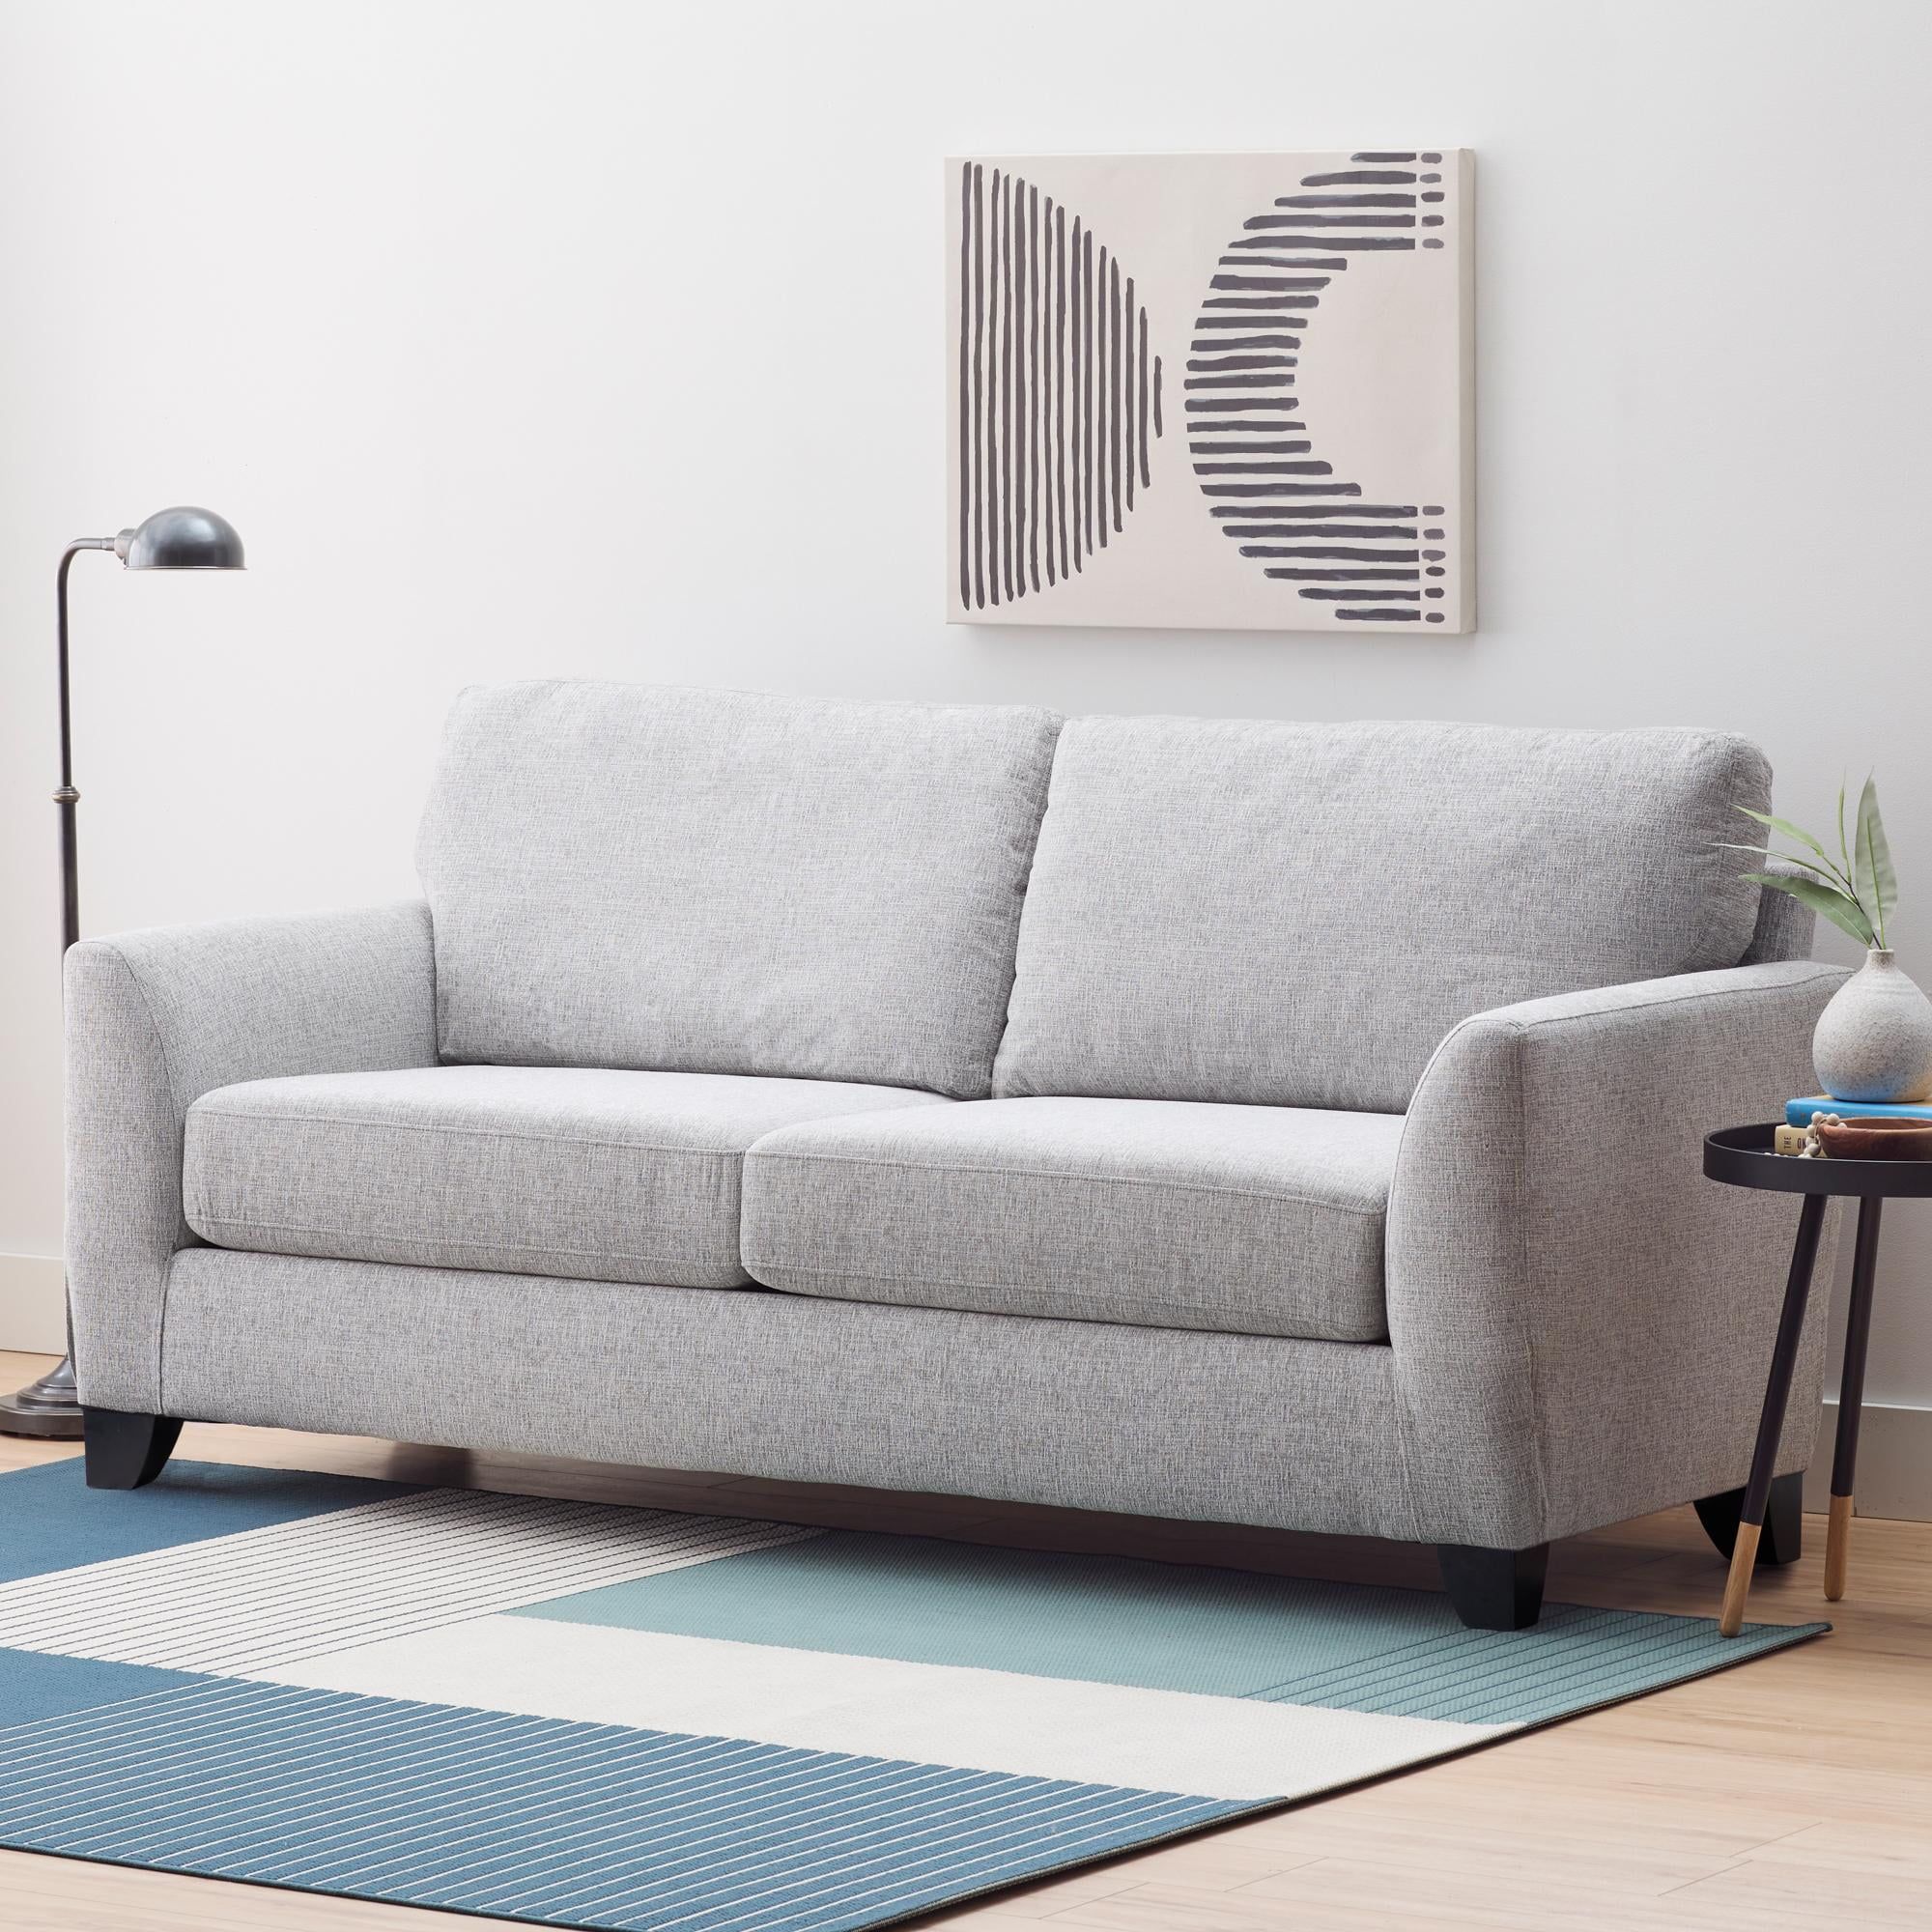 Gap Home Curved Arm Upholstered Sofa, Gray – Walmart Regarding Sofas With Curved Arms (View 13 of 15)